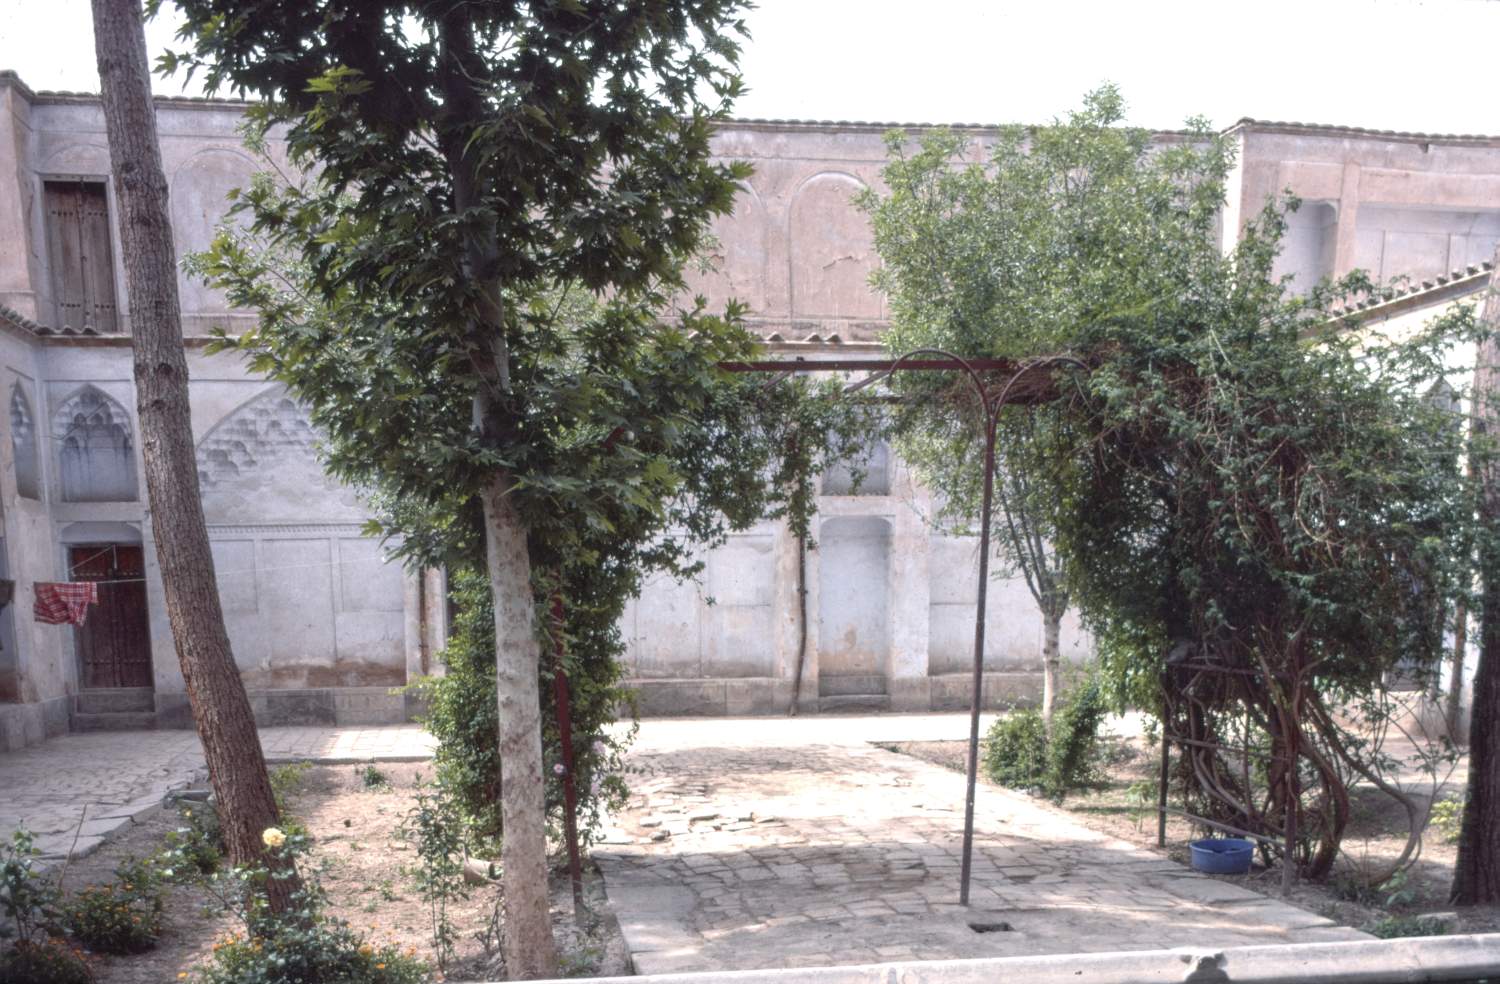 View of southern facade of courtyard from north side, looking down central axis between plant beds.